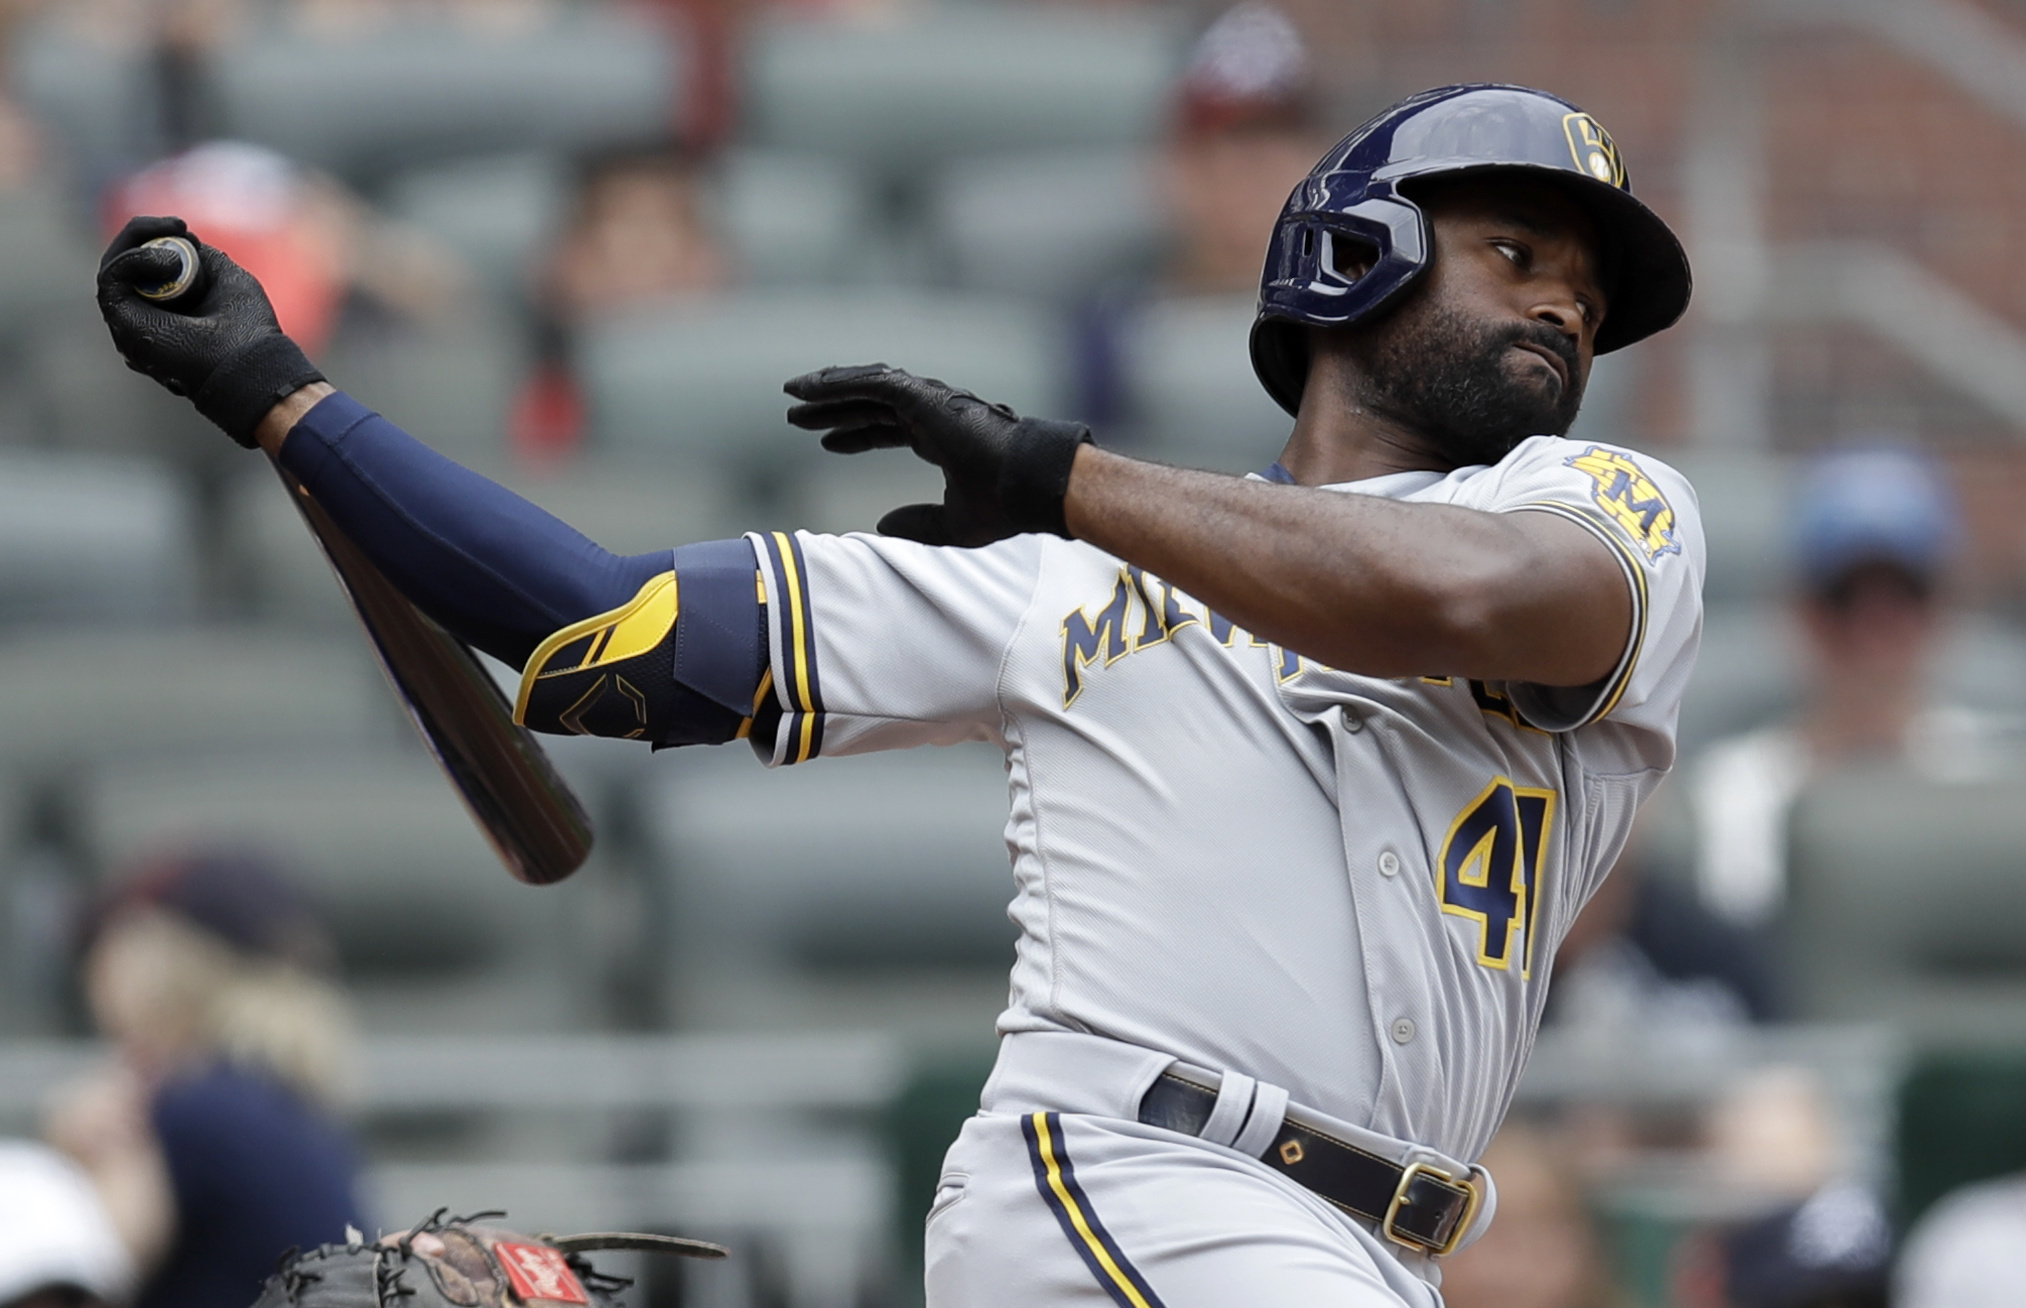 Jackie Bradley Jr. had a tough year with the Brewers. Why would